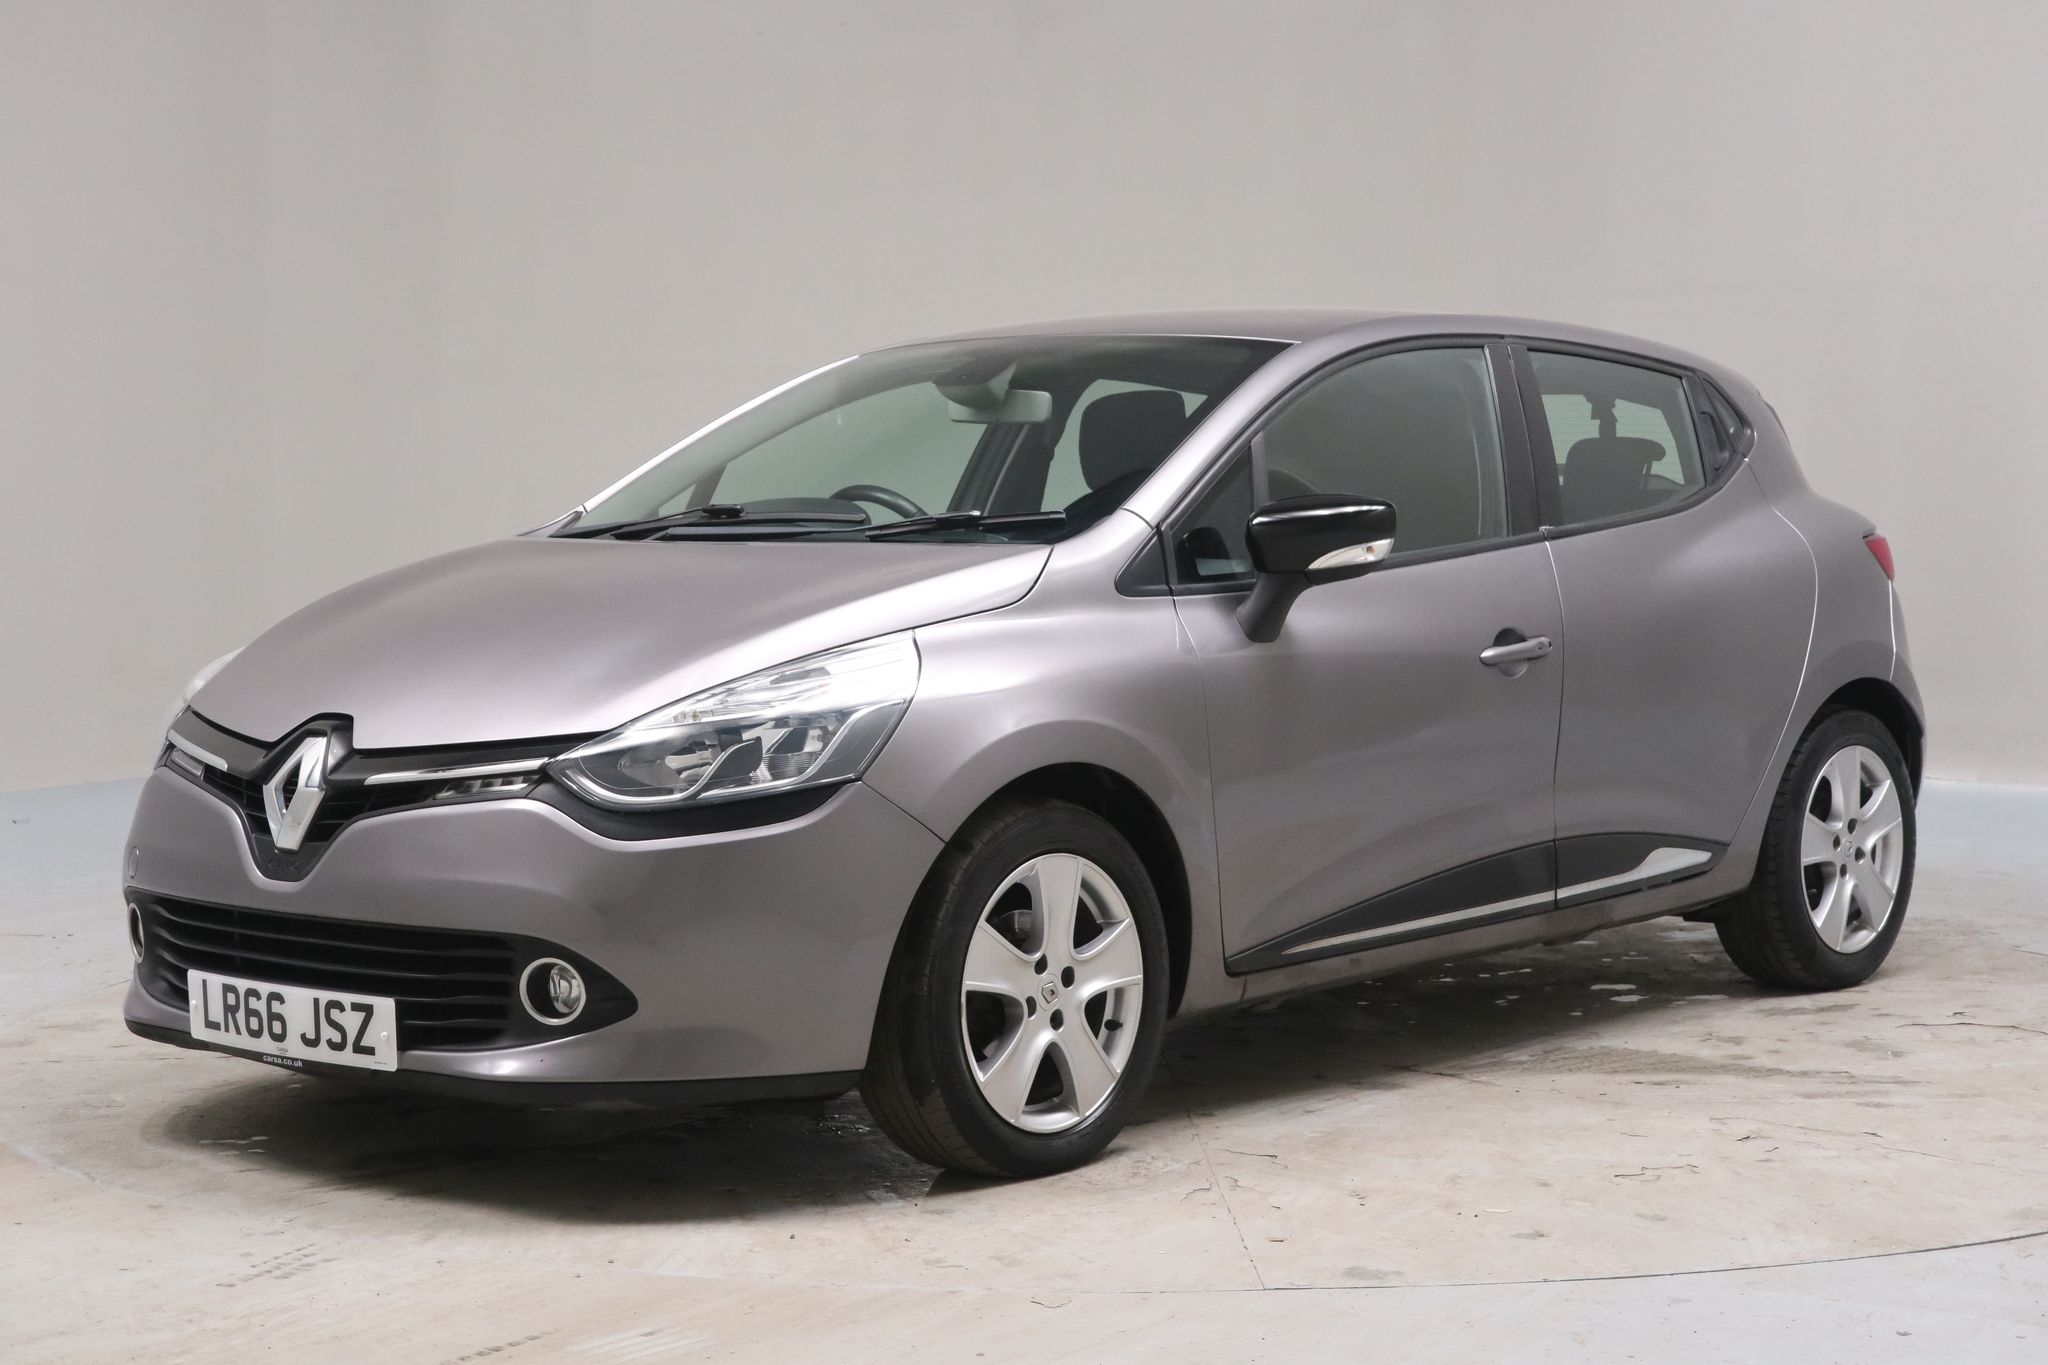 2016 used Renault Clio 1.5 dCi Dynamique Nav (90 ps)